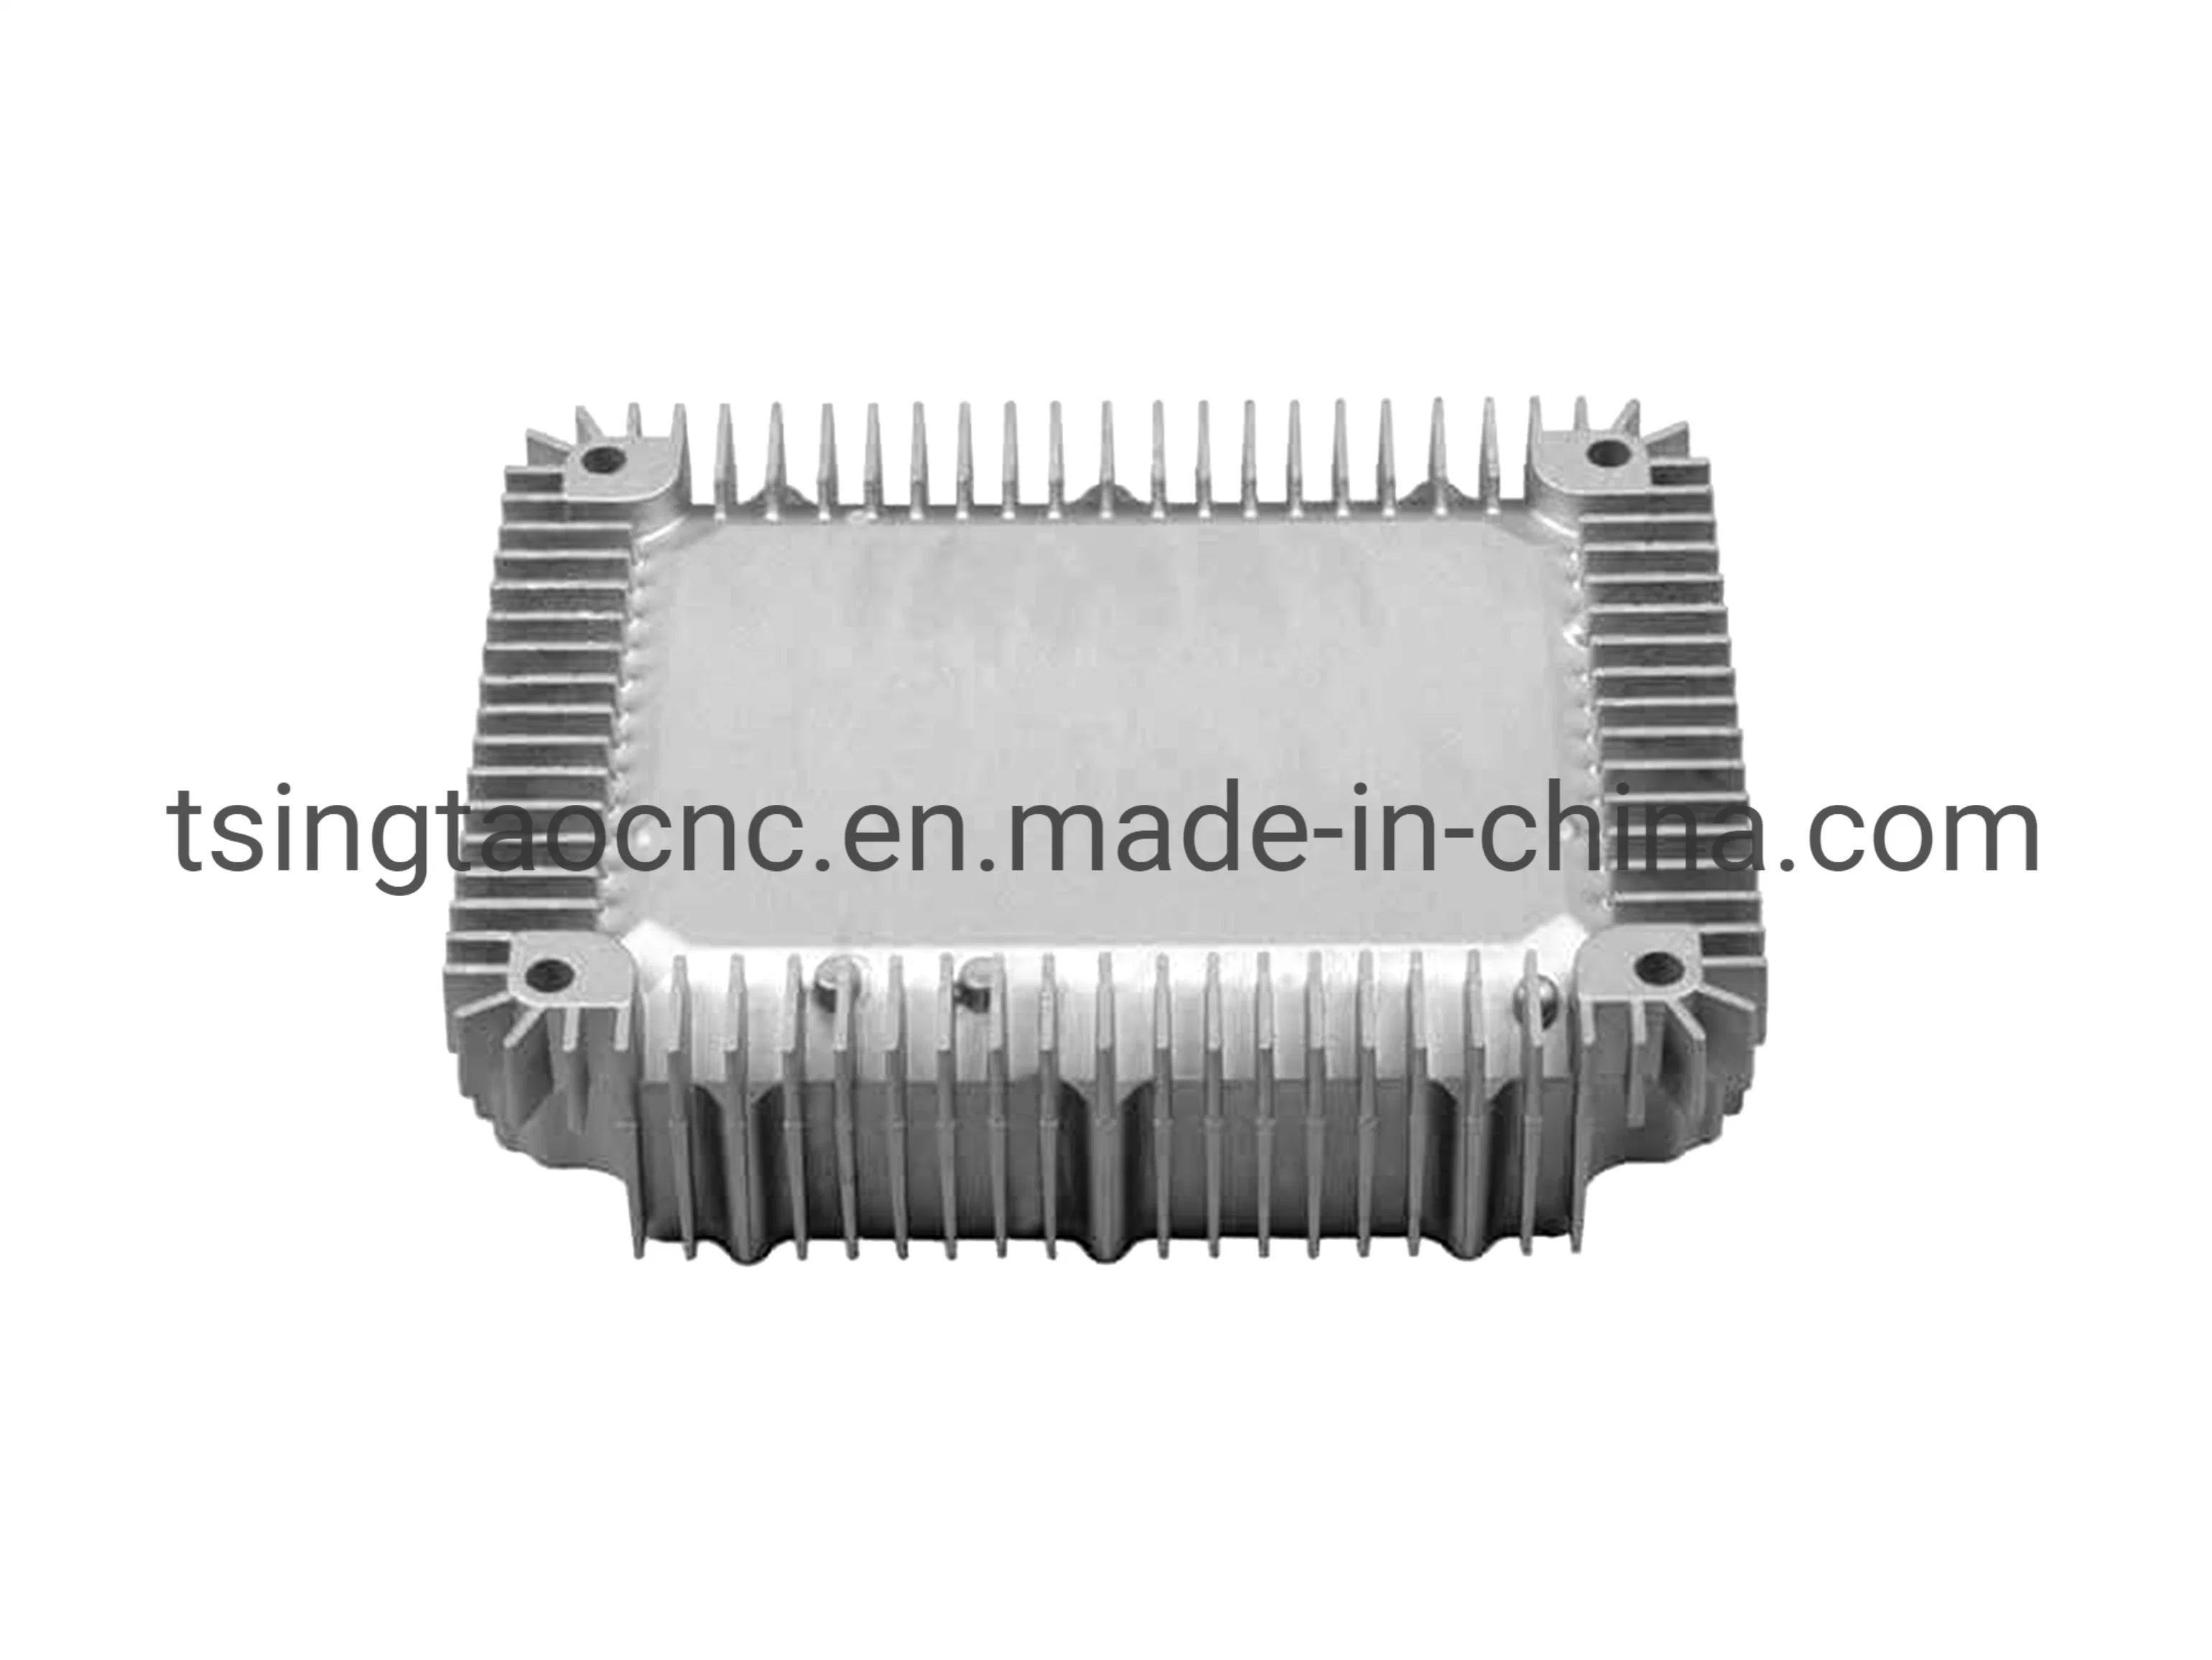 Die Casting Aluminum Alloy Case Used for Mechanical Component